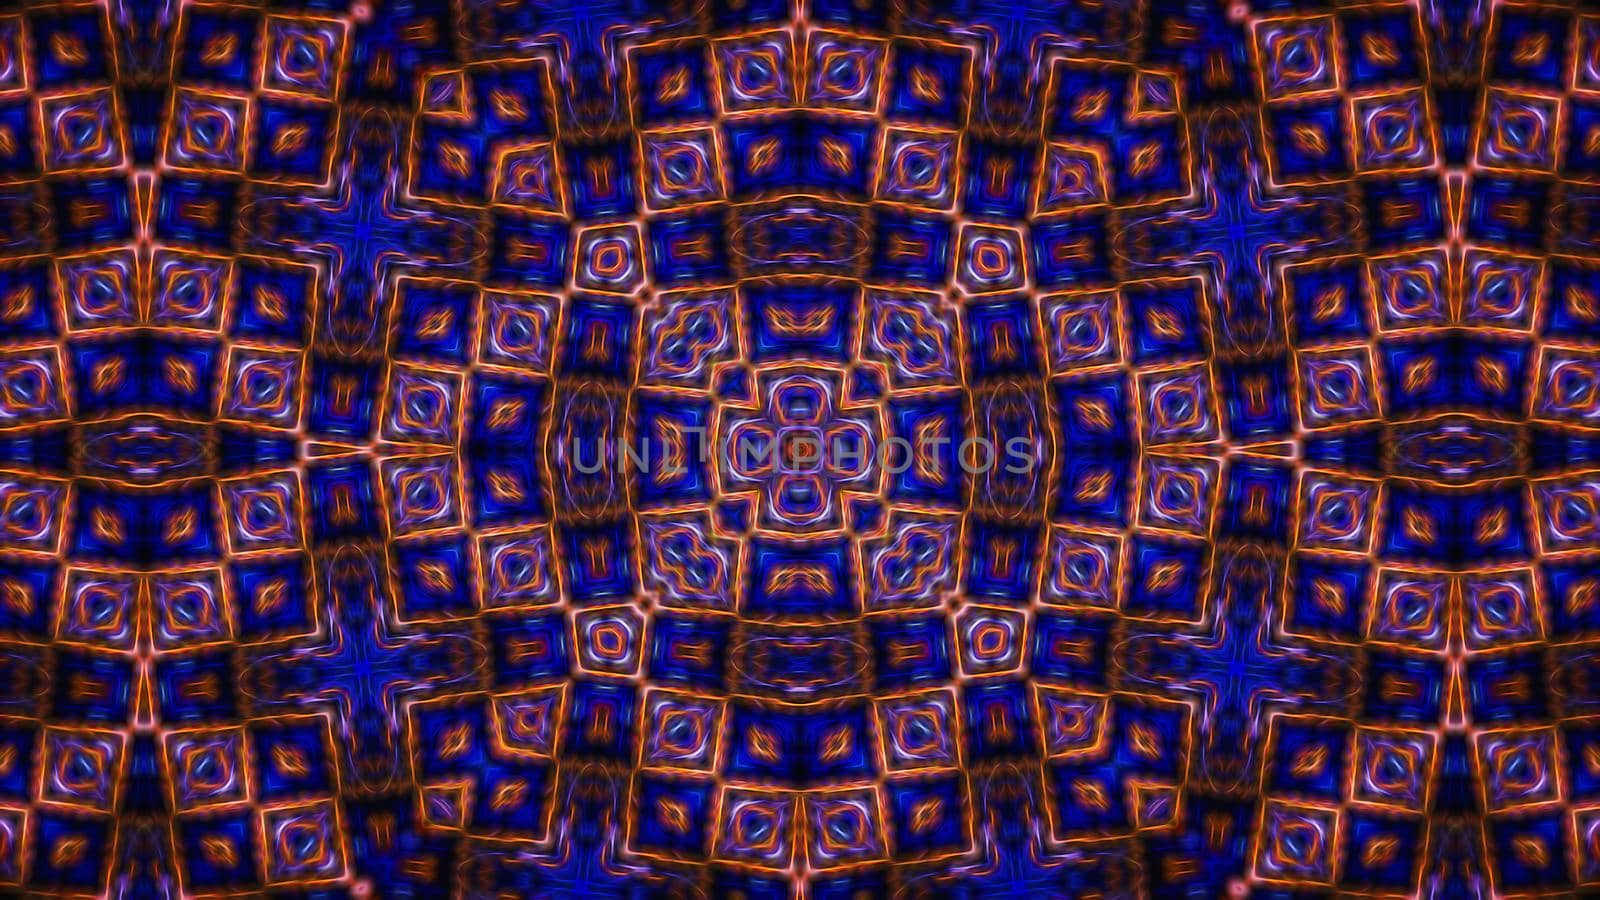 Abstract symmetrical textured blue background with an ornament by Vvicca